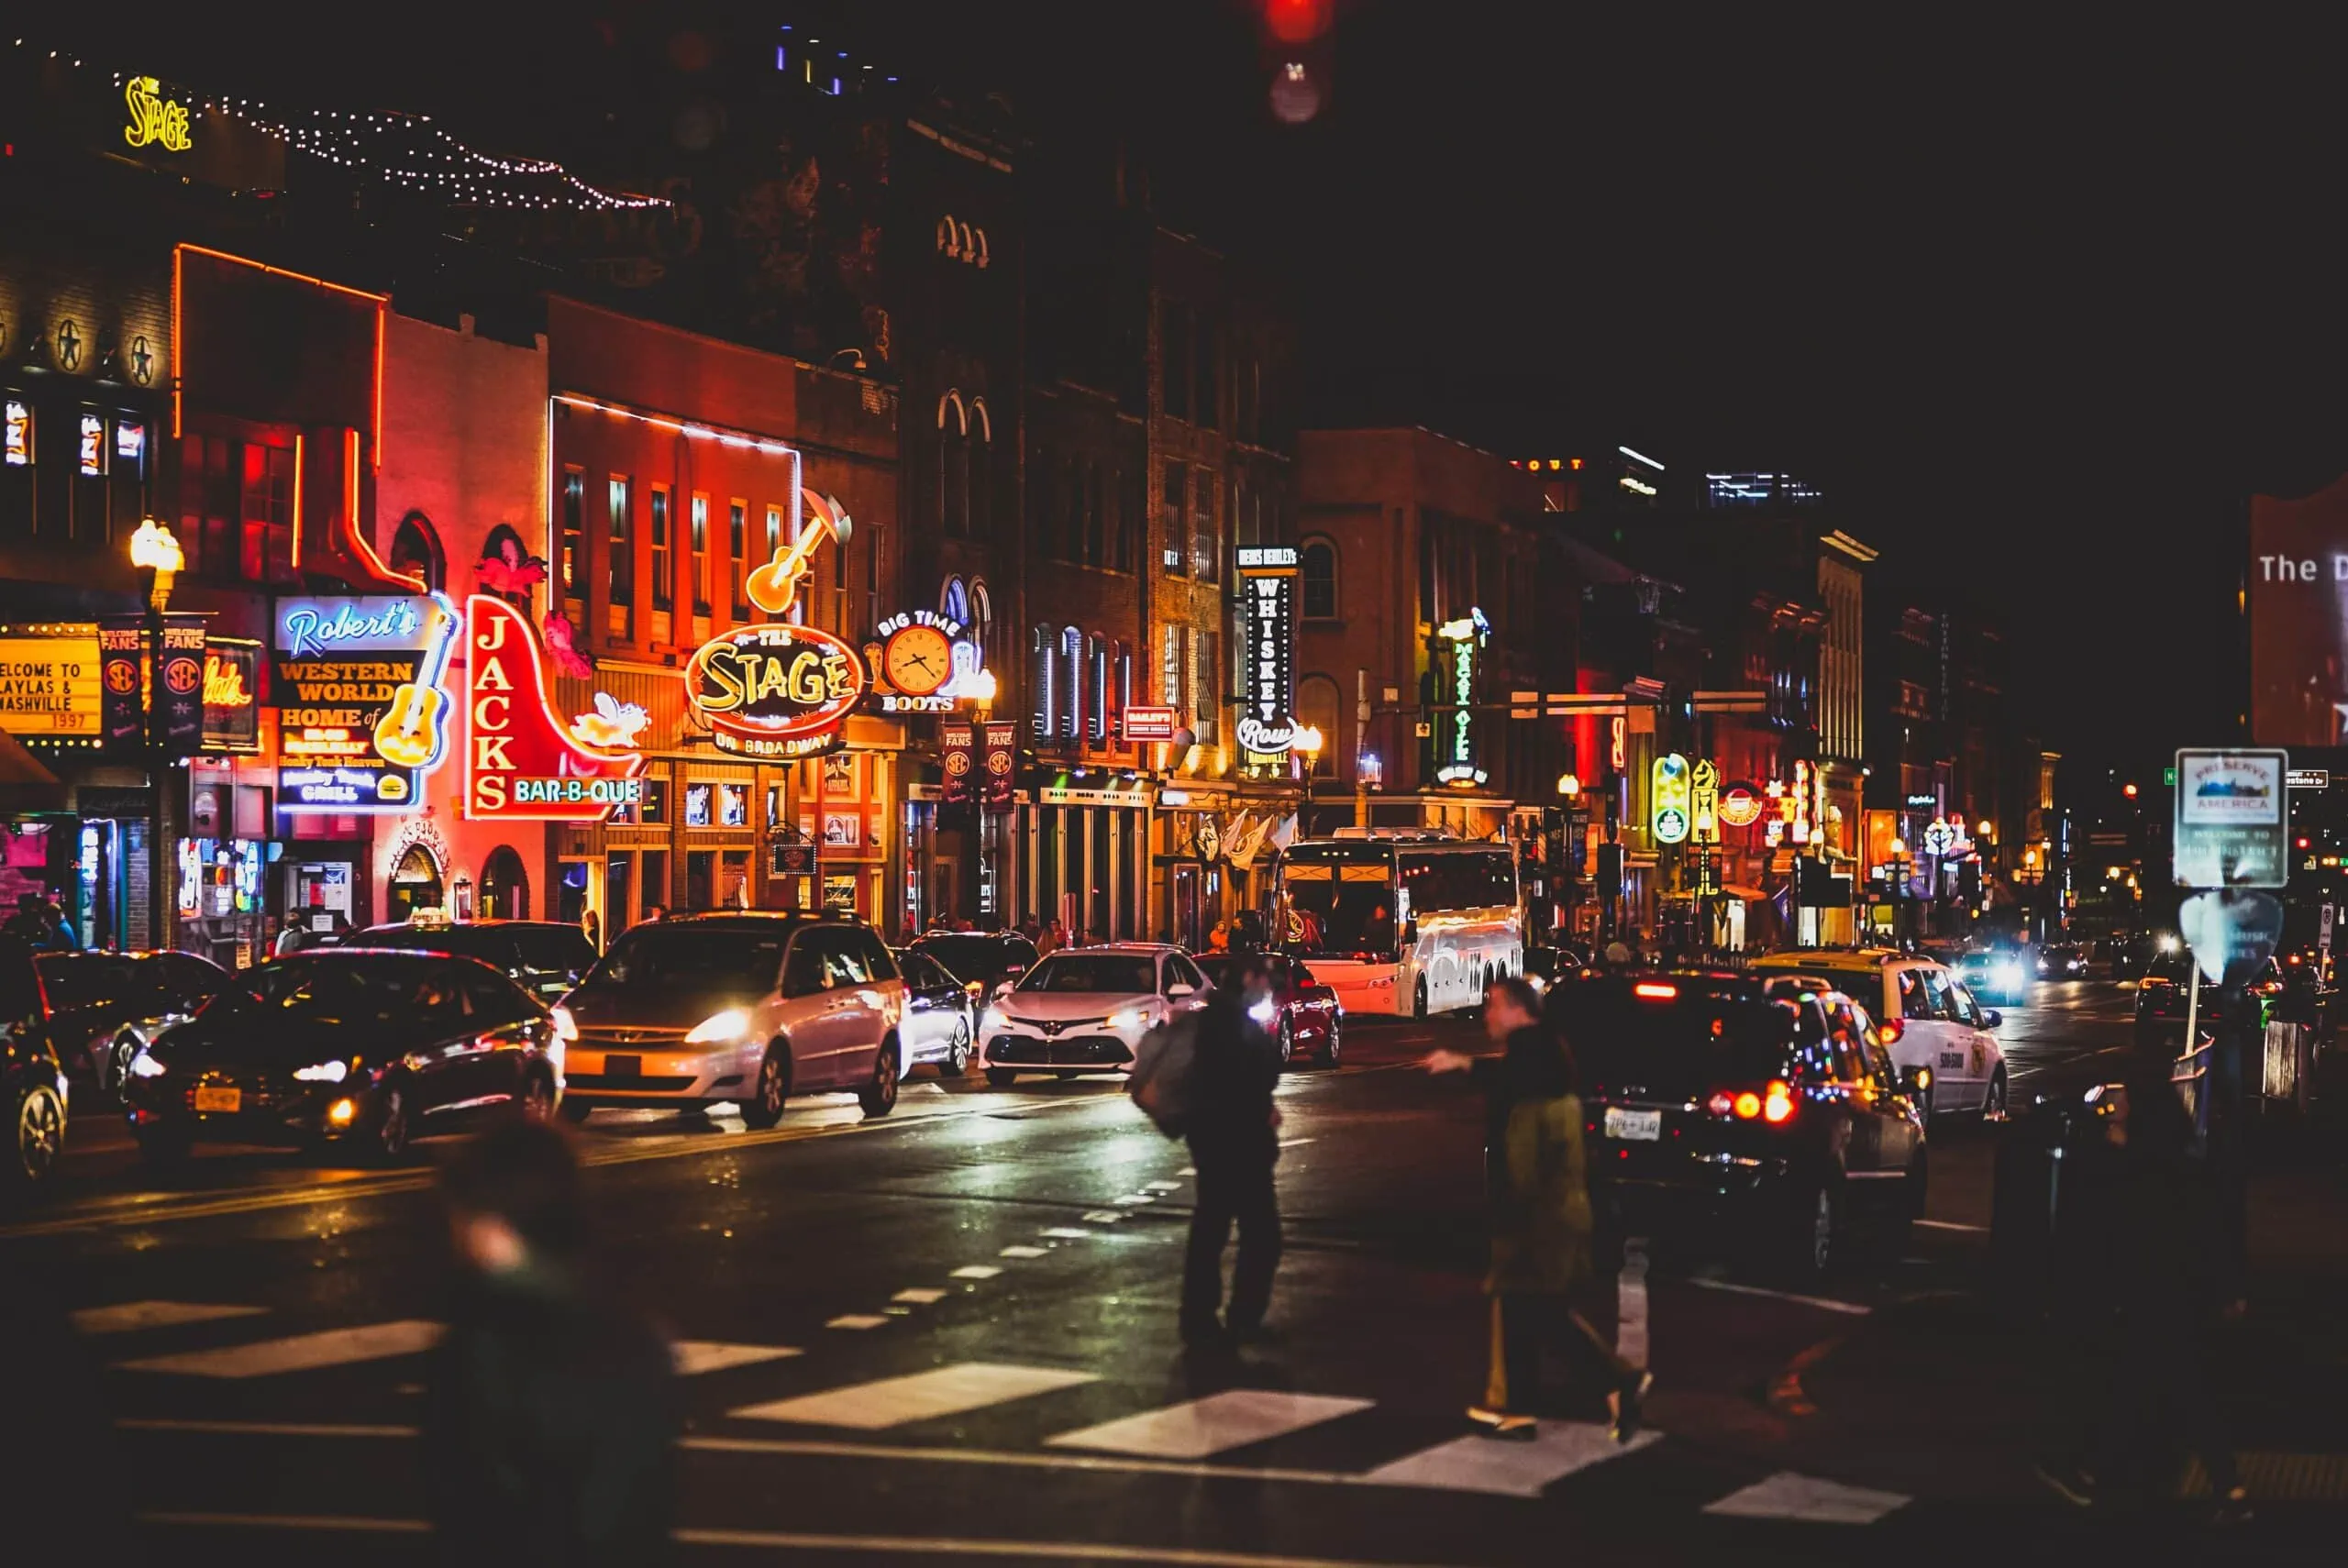 Nashville Broadway bars monitored with access control systems